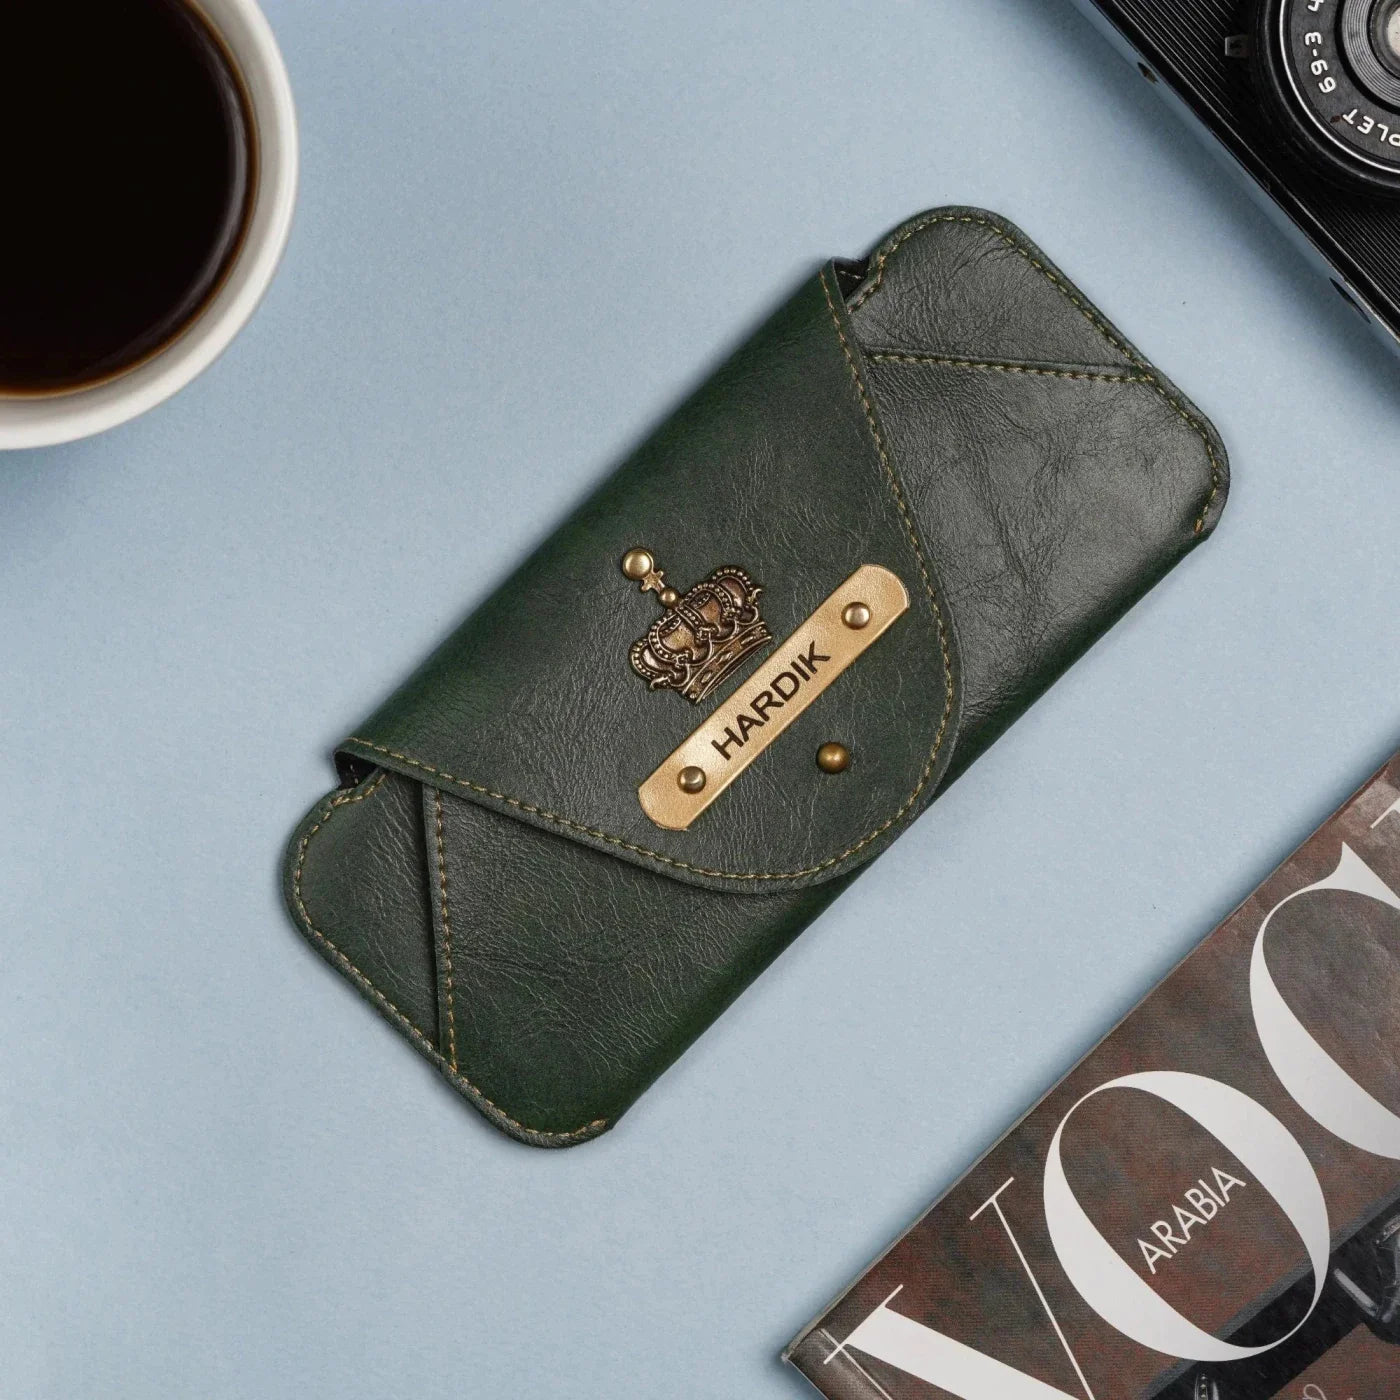 Show off your unique style with this personalized eyewear case.